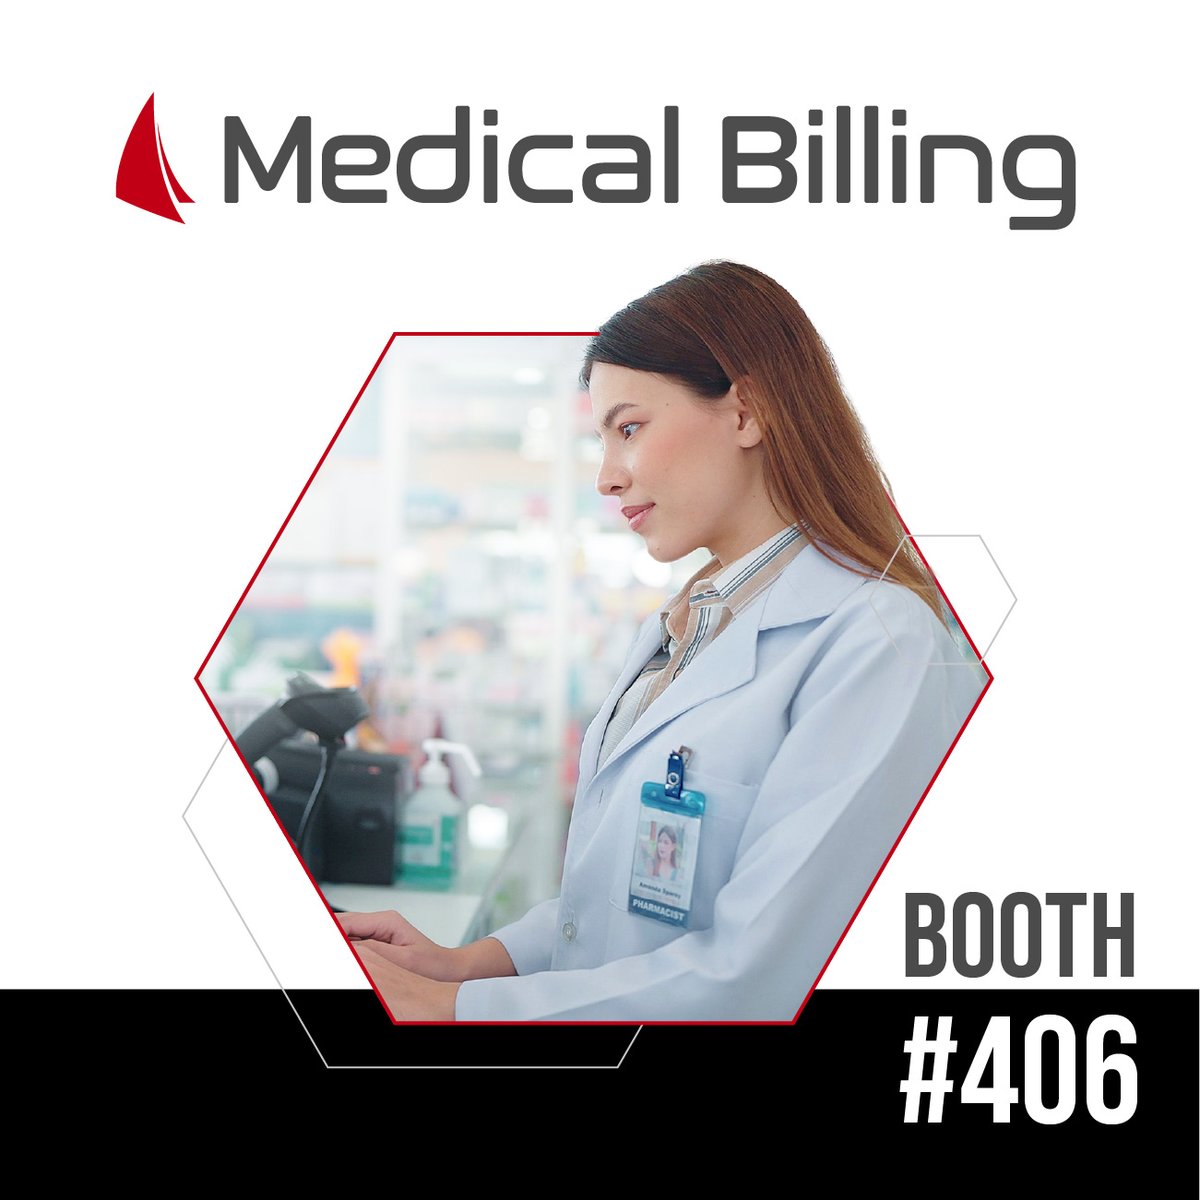 Attention pharmacists! Looking for a way to improve your medical billing process? RedSail Medical Billing is the answer! Visit Booth #406 at GeriMed 2023 to see how our innovative software streamlines billing, boosts revenue, and can optimize your business for success. #GMC23